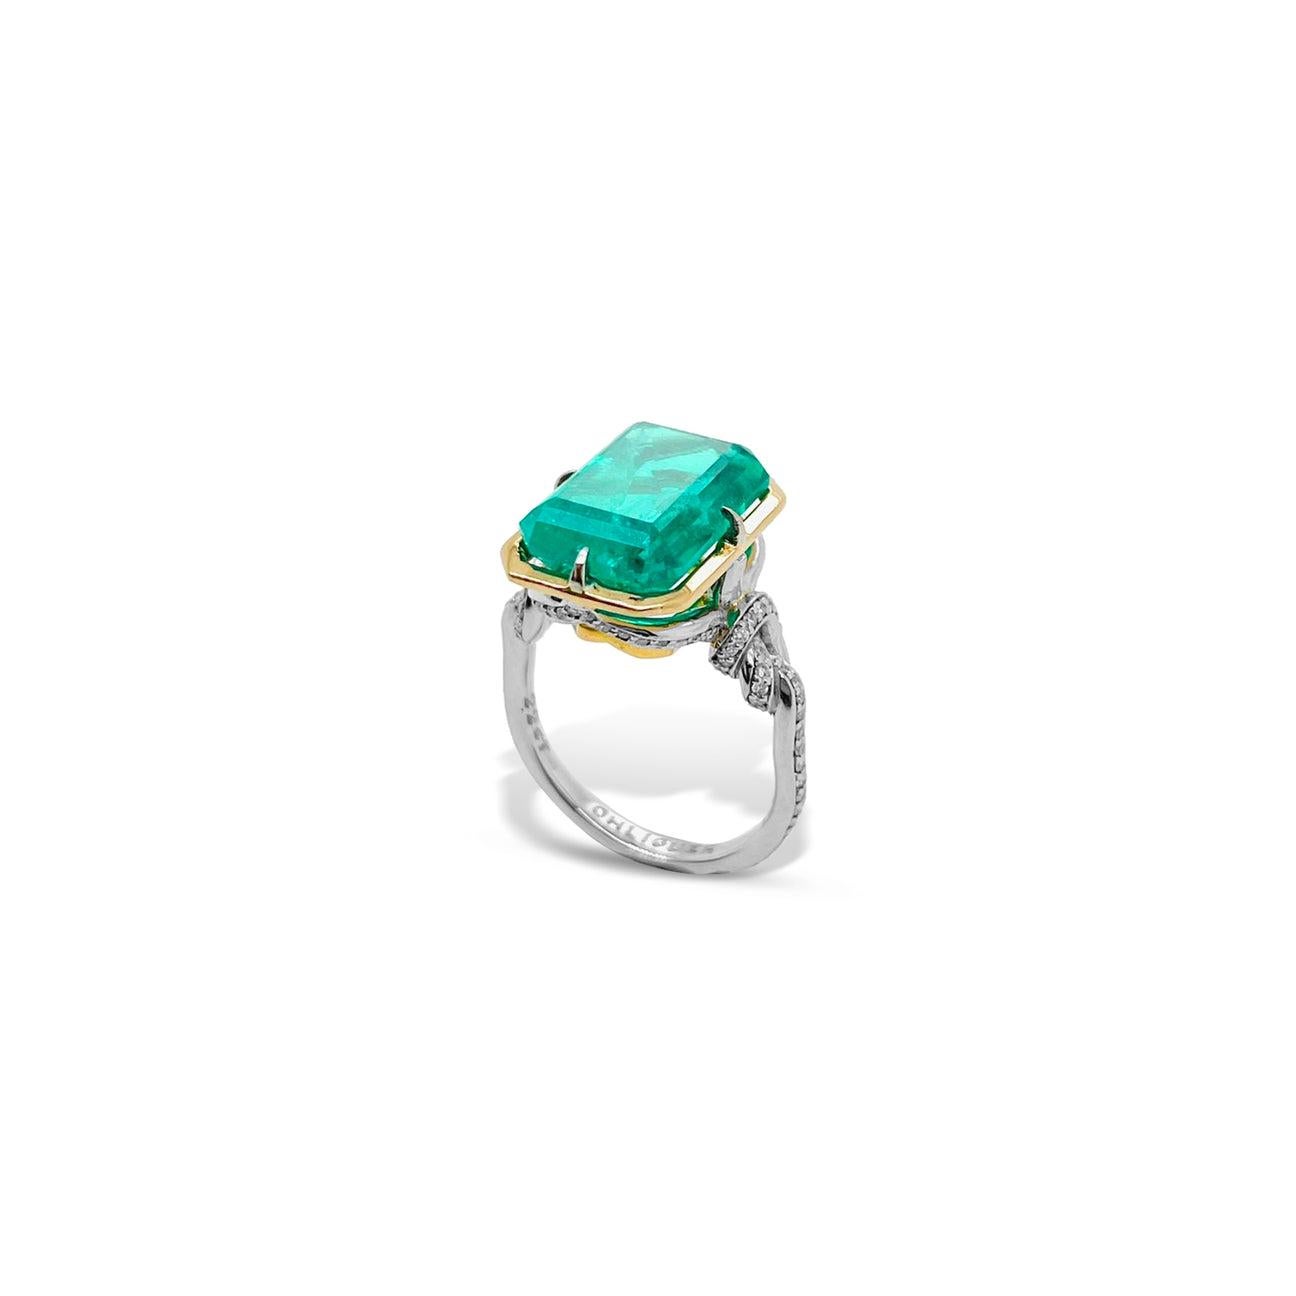 Emerald Cut 4ct Emerald in Forget Me Knot Style Ring